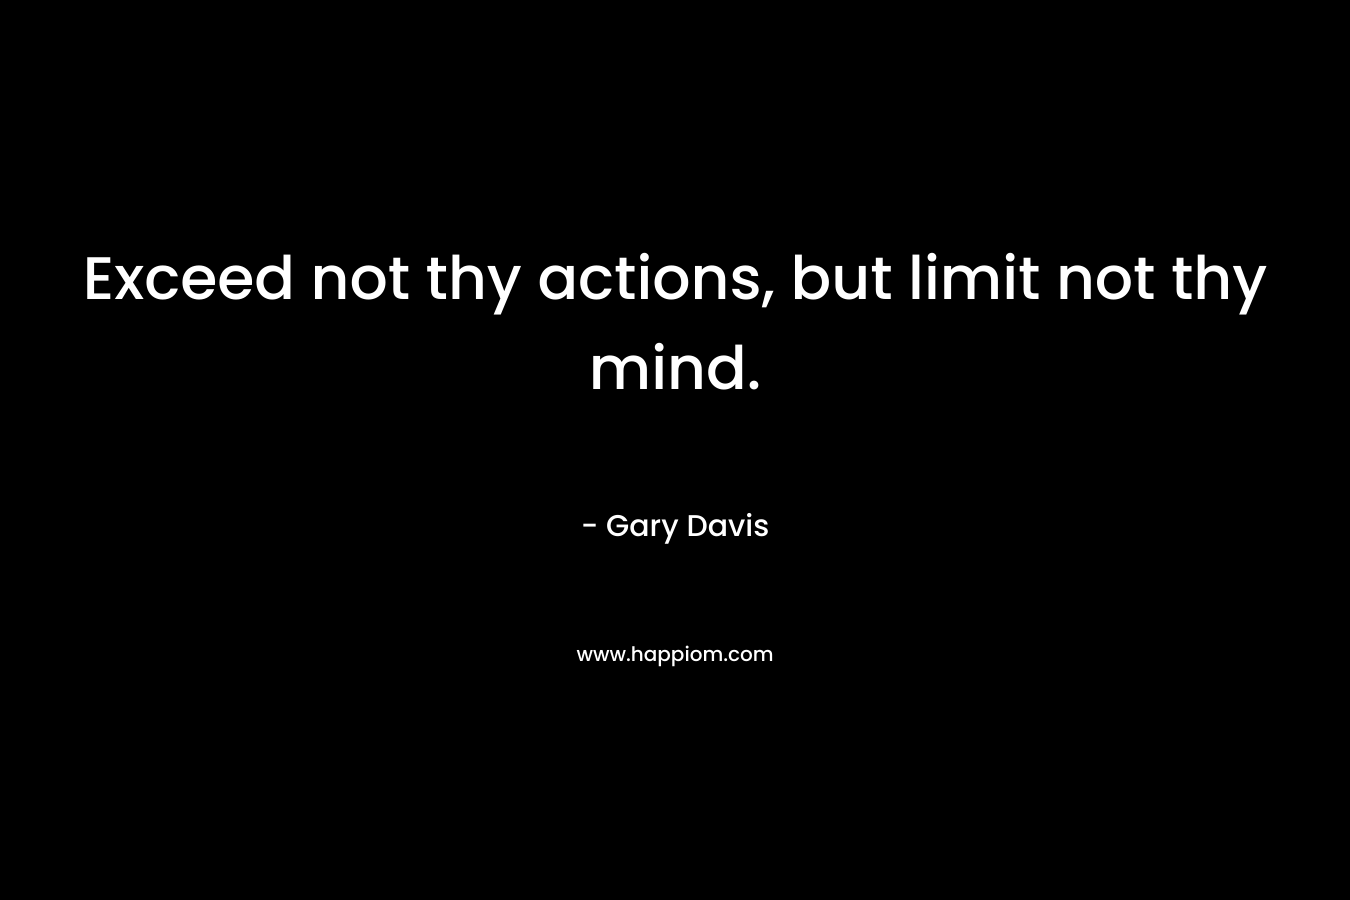 Exceed not thy actions, but limit not thy mind.